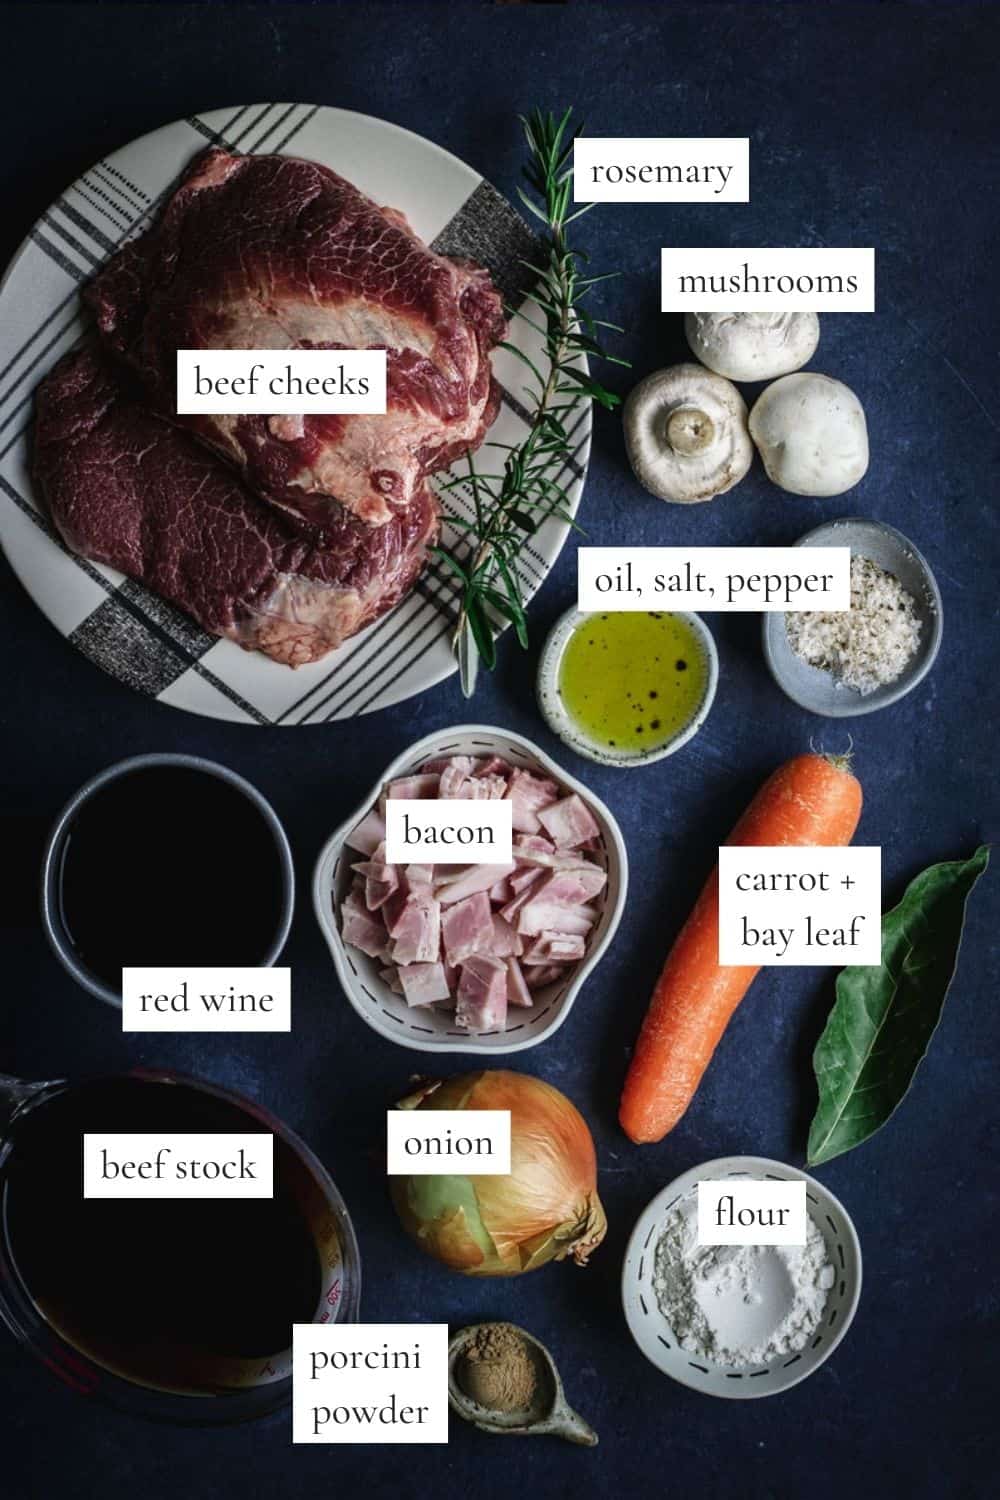 All the ingredients you need to make slow cooked beef cheeks in red wine.